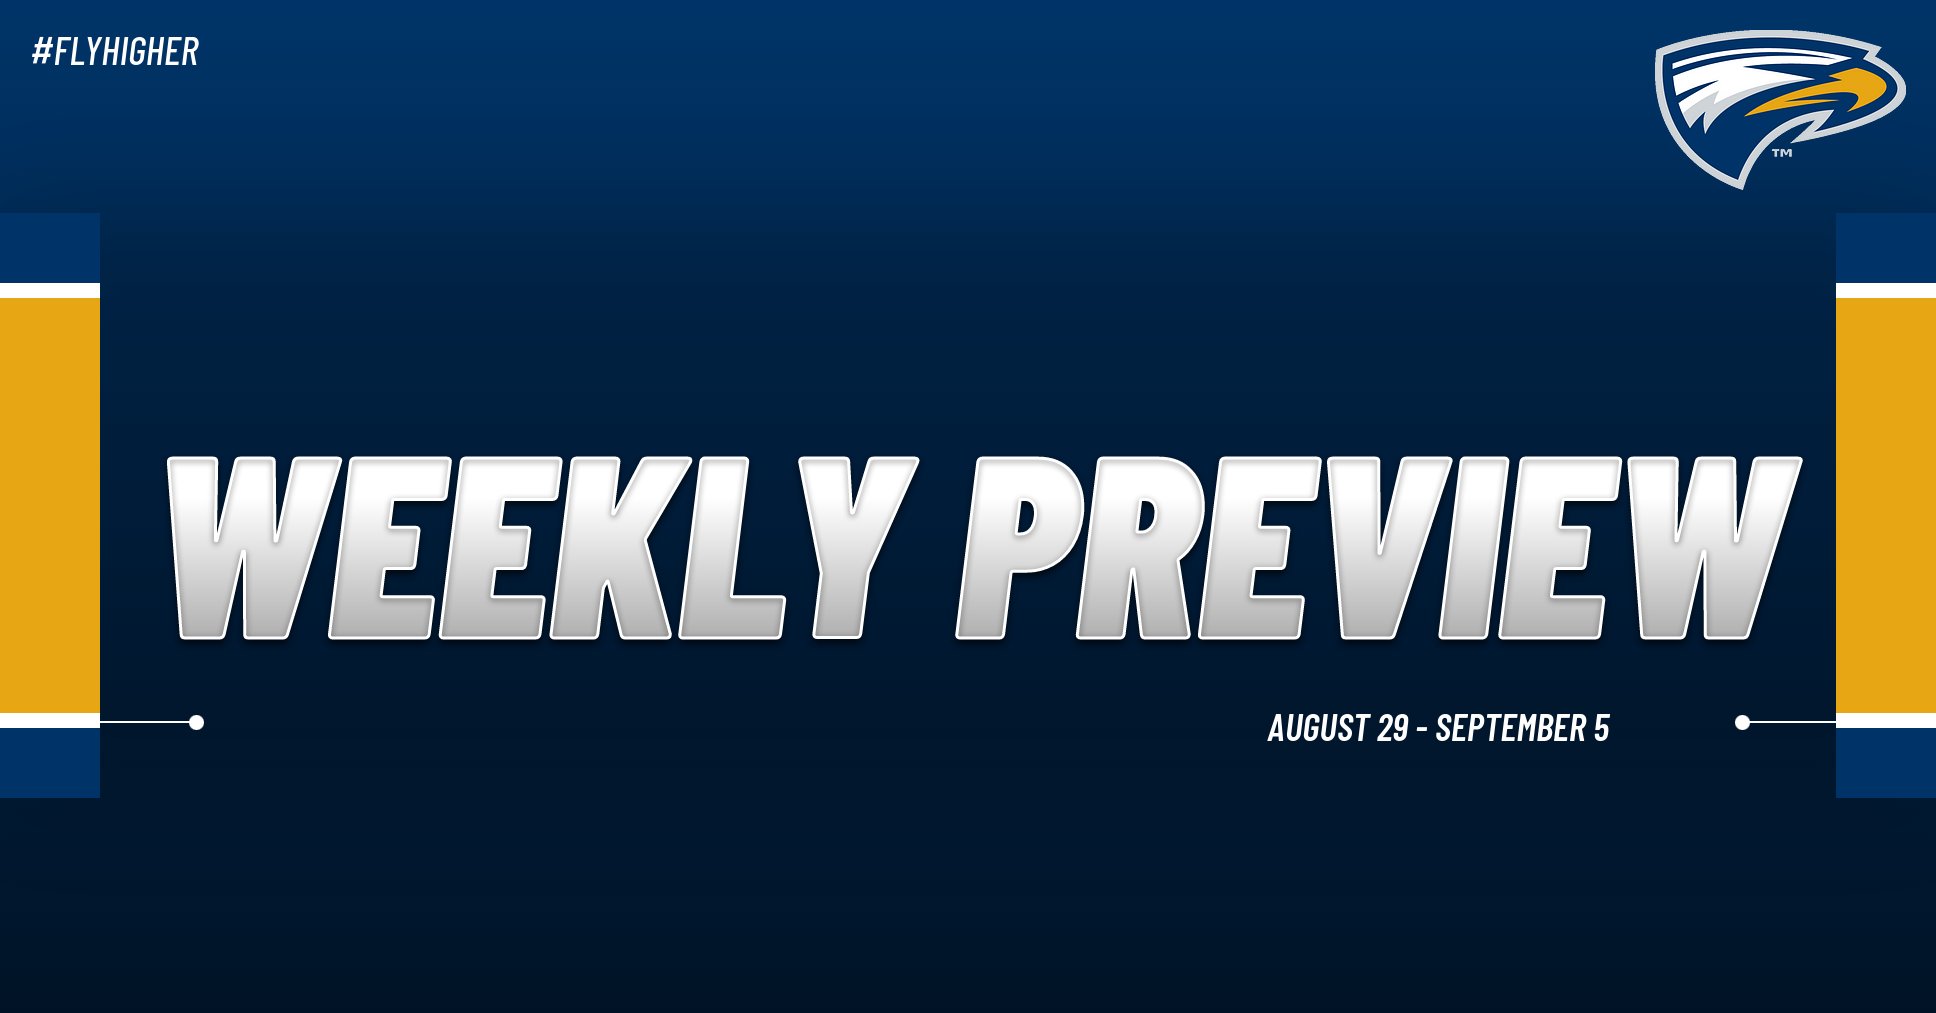 Emory Athletics Weekly Preview: August 29 - September 5